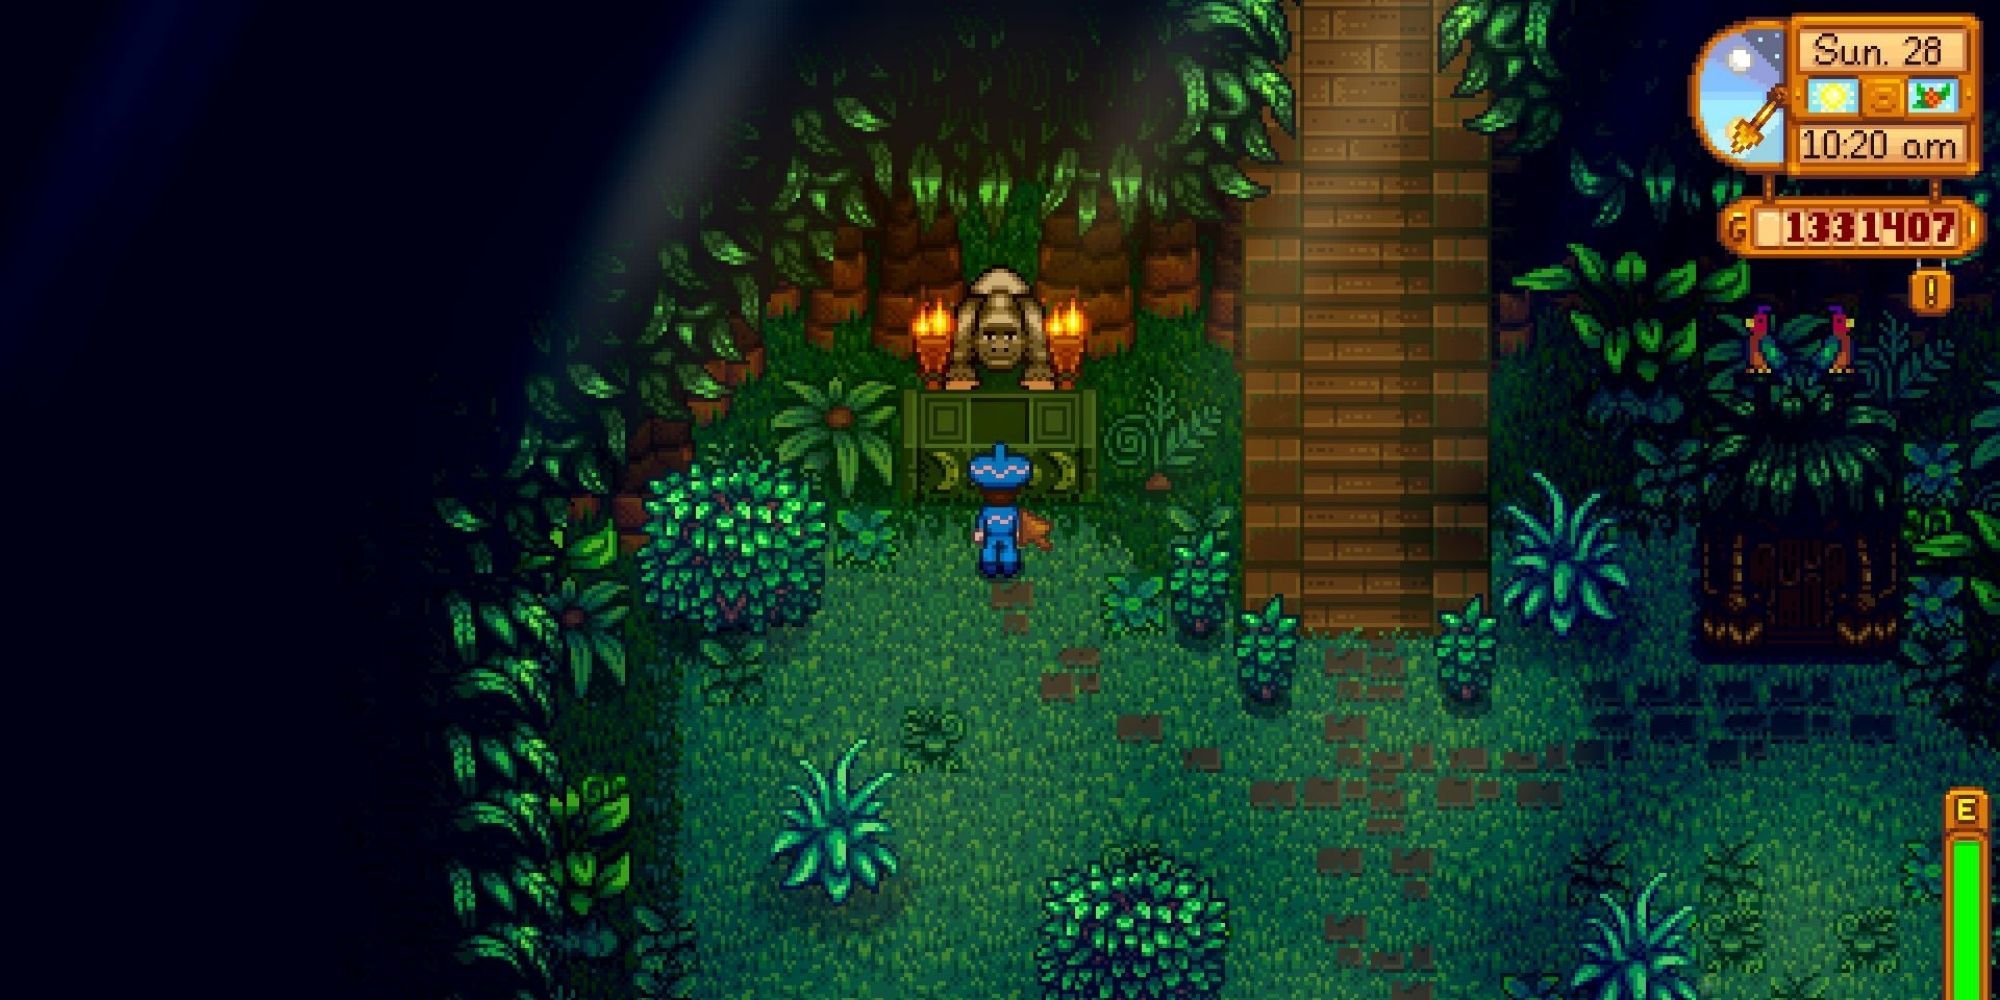 Character in jungle by standing in front of a shrine by some stairs